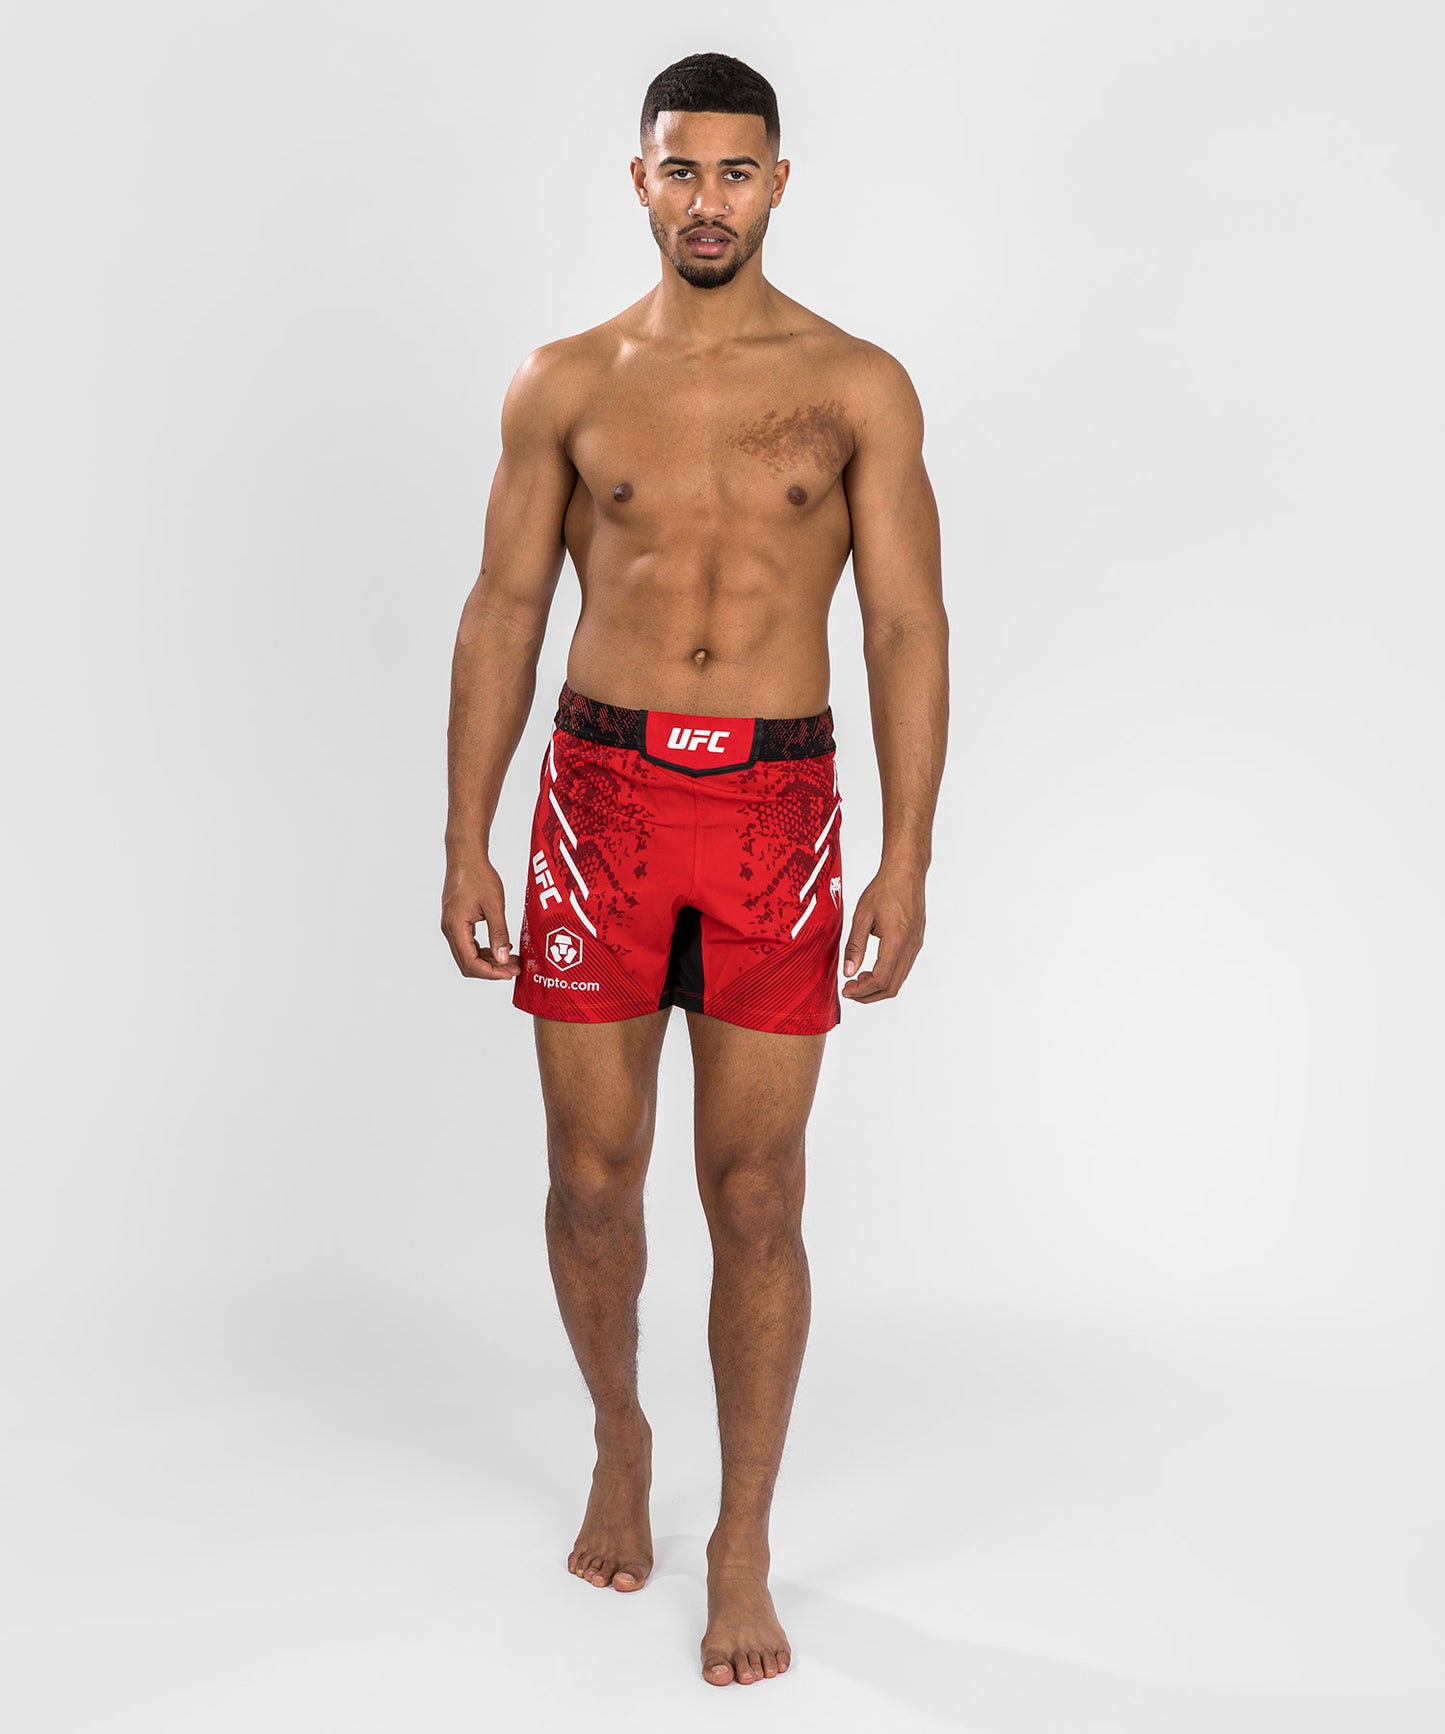 UFC Adrenaline by Venum Authentic Fight Night Men's Fight Short - Short Fit  - Red